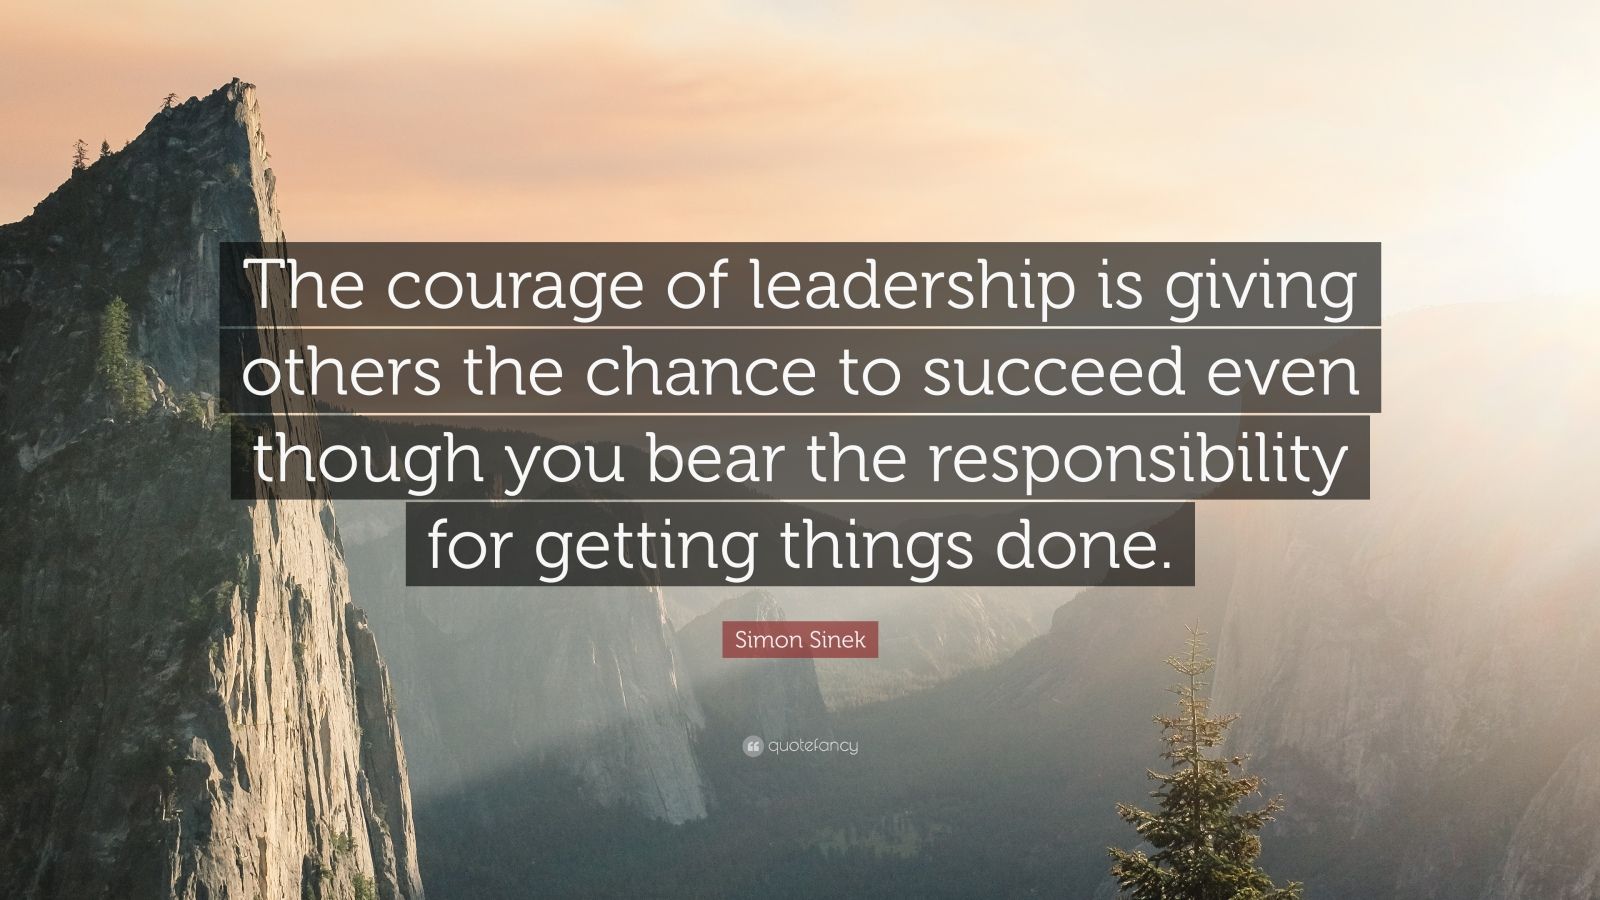 Simon Sinek Quote “The courage of leadership is giving